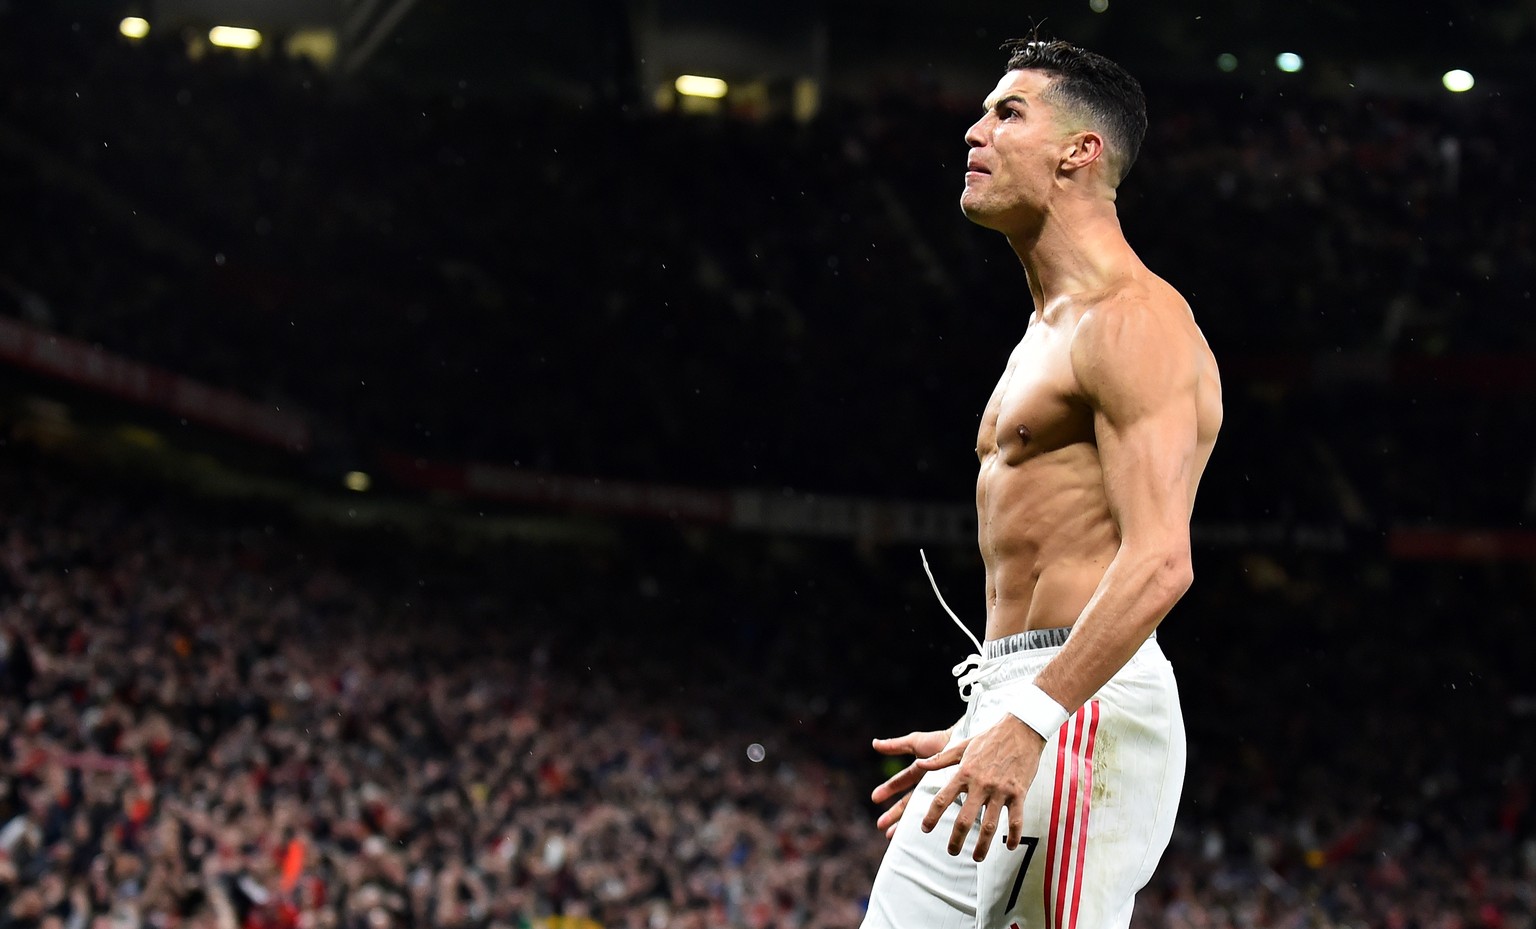 epa09496432 Cristiano Ronaldo of Manchester United celebrates after scoring during the UEFA Champions League group F soccer match between Manchester United and Villarreal CF in Manchester, Britain, 29 ...